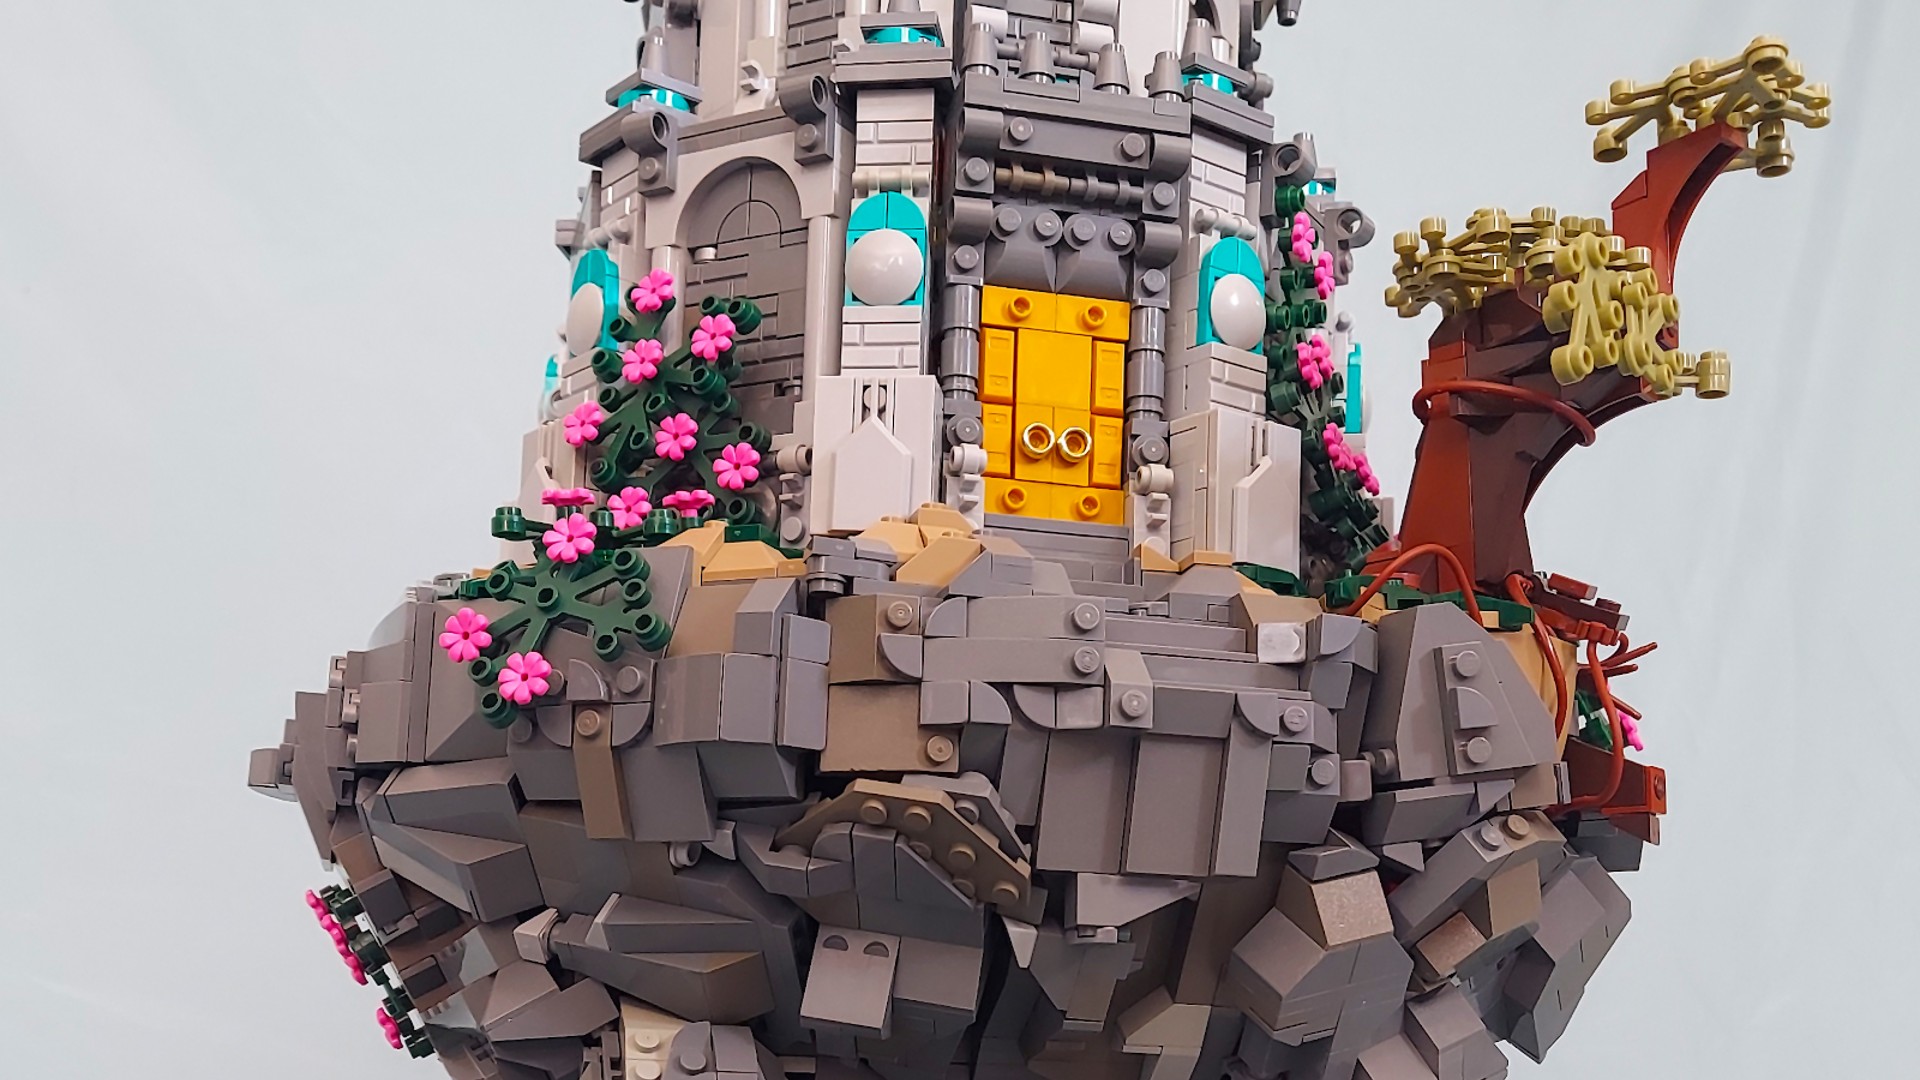 Elden Ring's Wondering Mausoleum made out of Lego